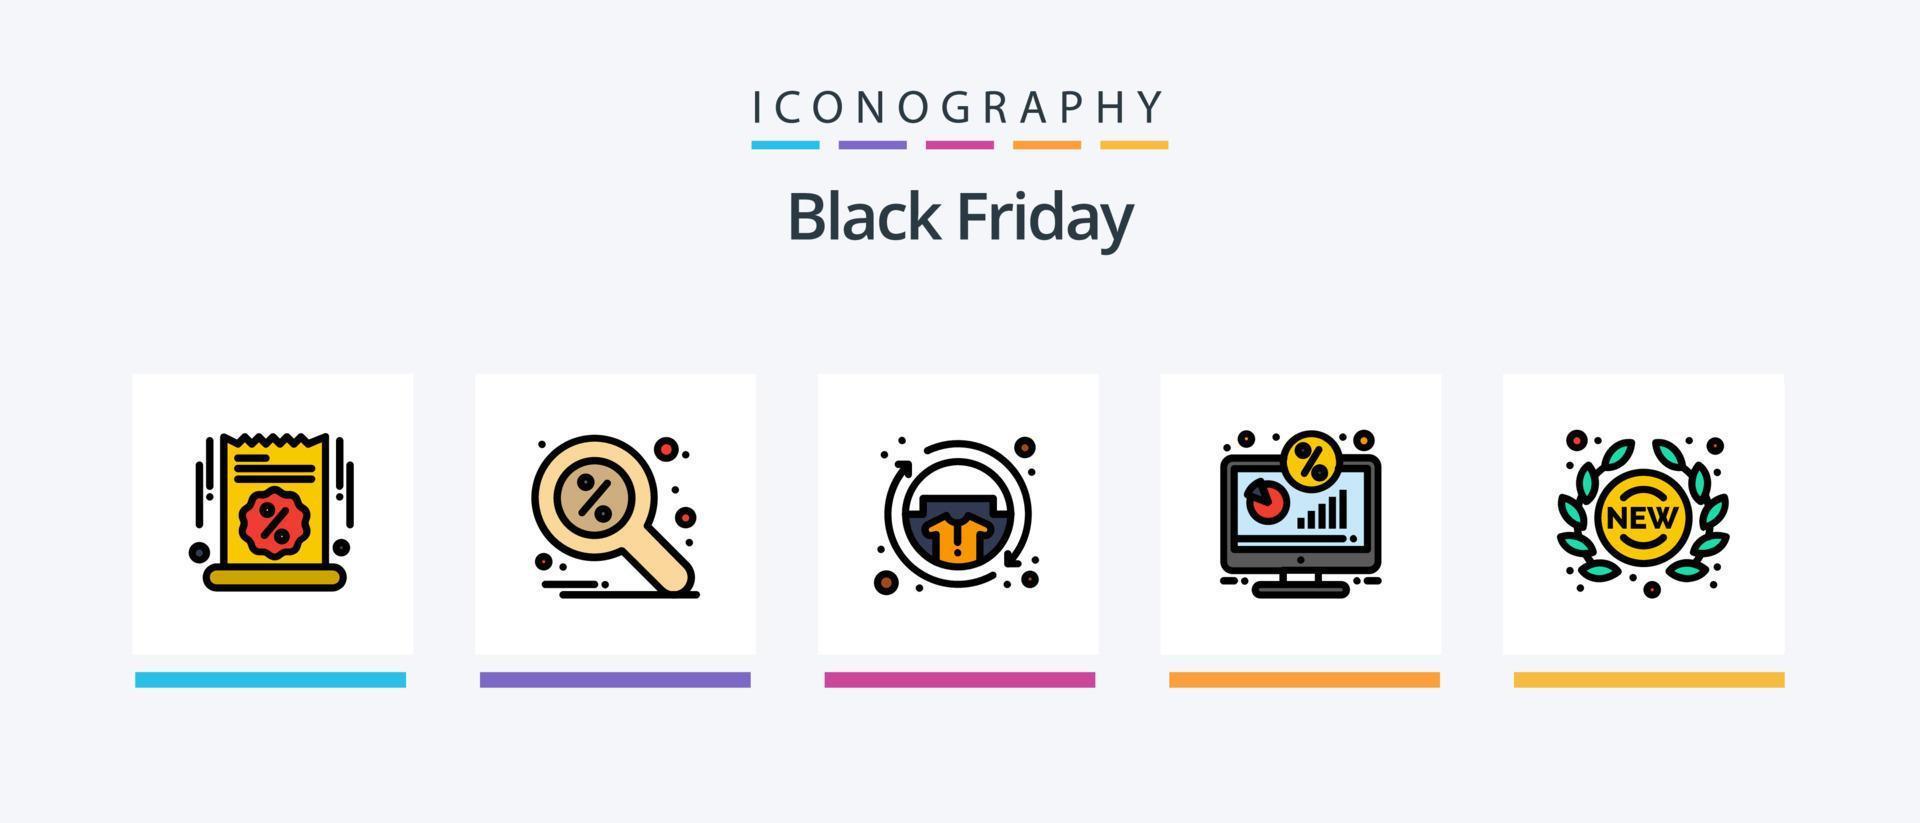 Black Friday Line Filled 5 Icon Pack Including sticker. label. day. present. gift. Creative Icons Design vector